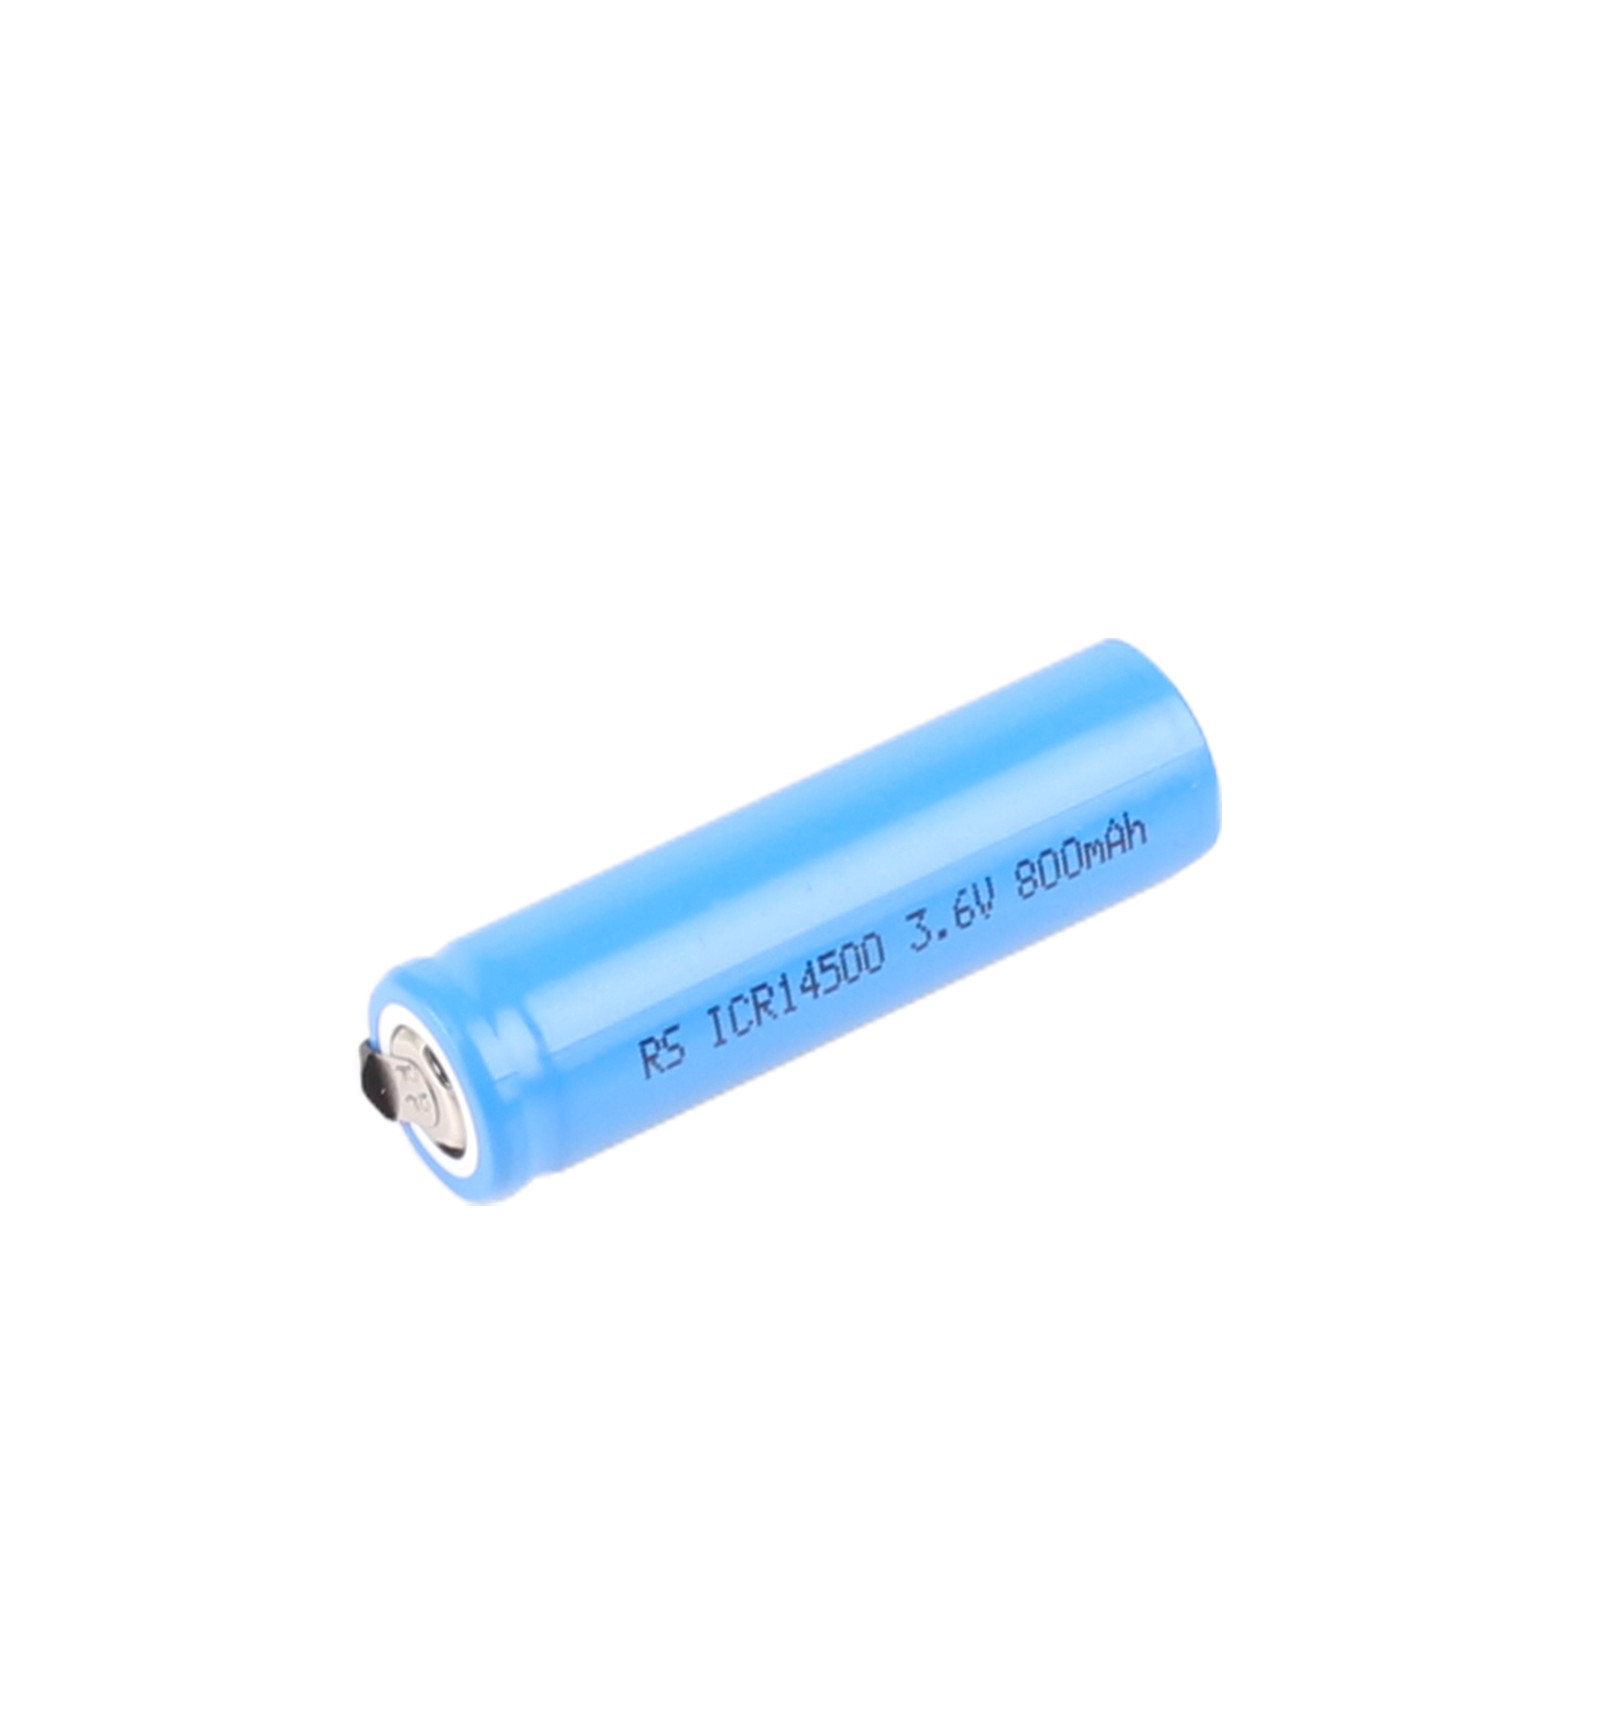 https://www.diyelectronics.co.za/store/14760-thickbox_default/rs-pro-14500-36v-800mah-li-ion-cell-with-tabs.jpg